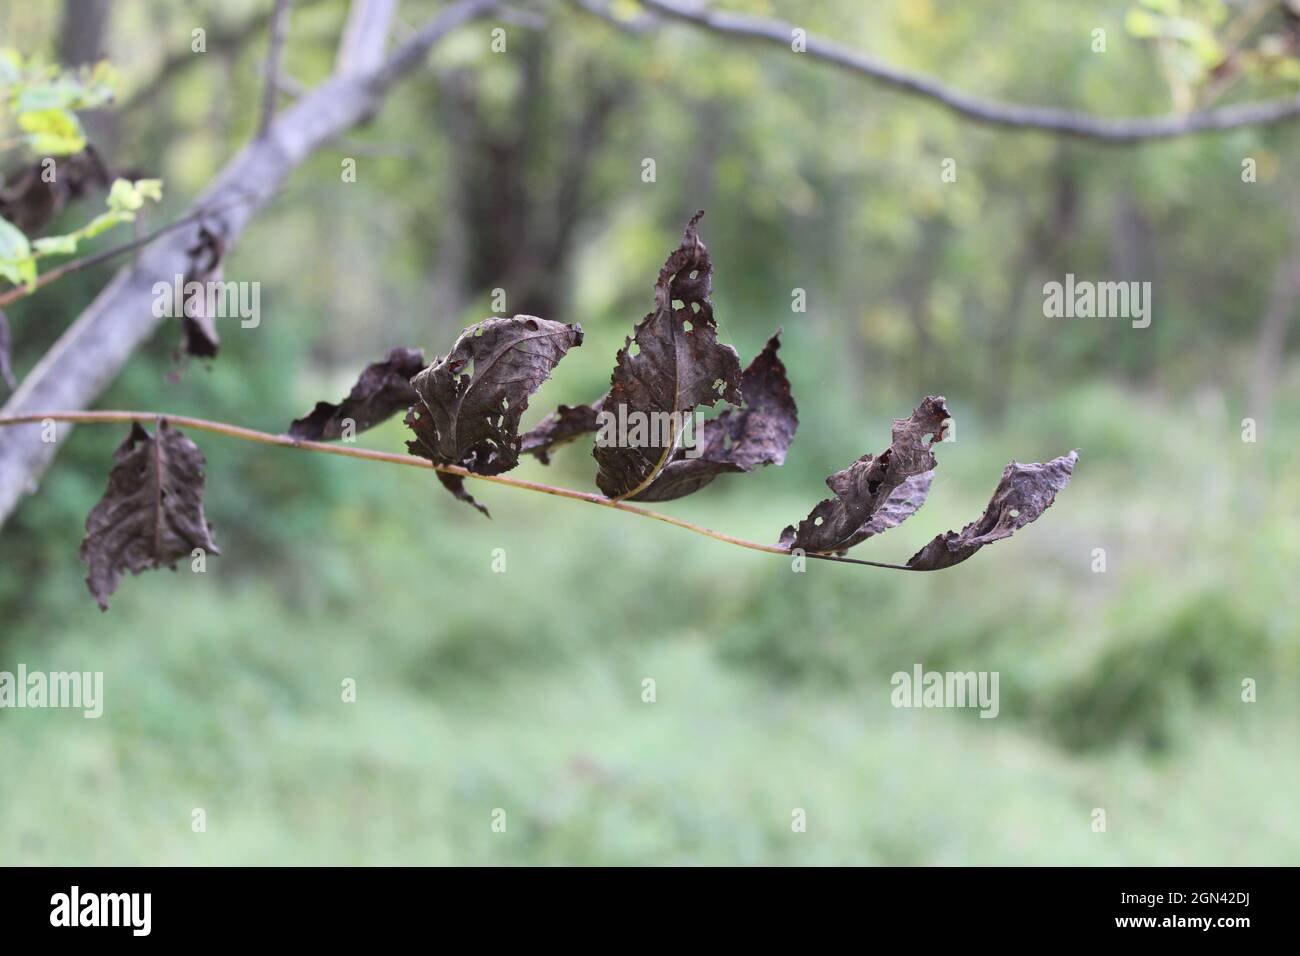 A Branch of Dead Leaves Damaged by Spotted Lanternflies Stock Photo